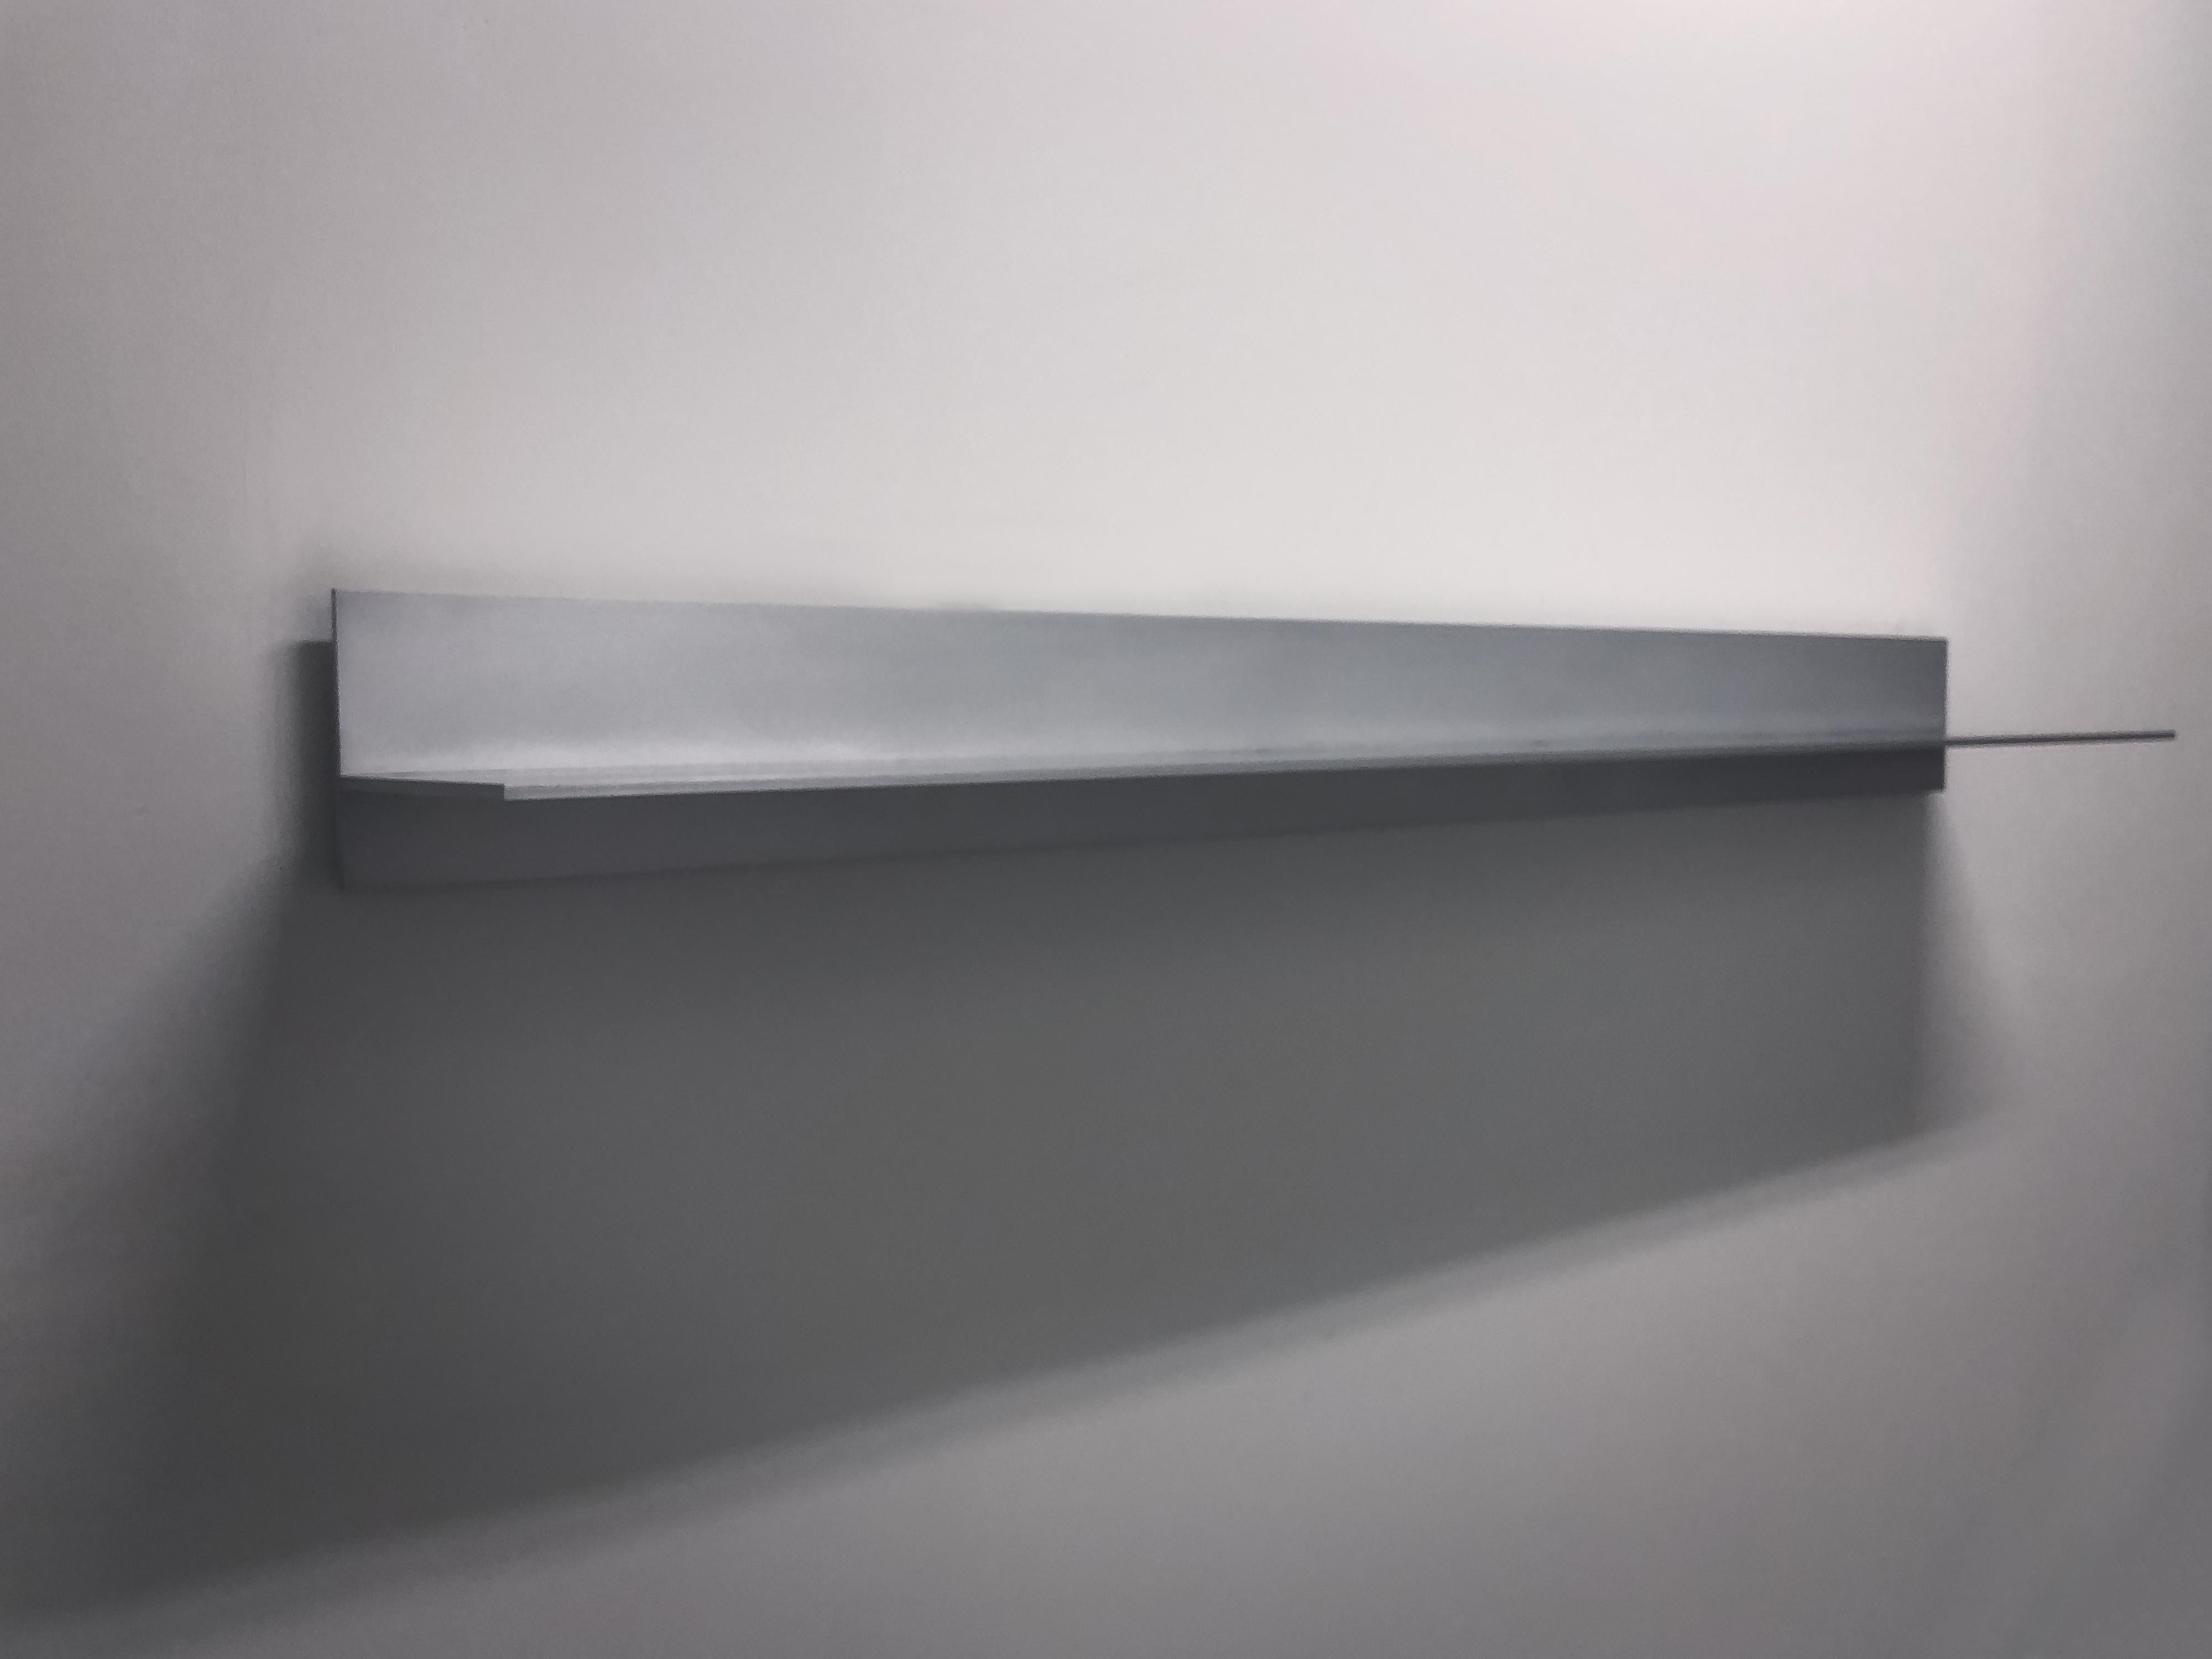 L-wall shelf in .25 inch thick aluminum plate. Digitally cut aluminum plates intersect and are fused with recessed welds that are ground smooth. Plates are hand finished and waxed. Included are two custom, steel wall cleats with instructions for